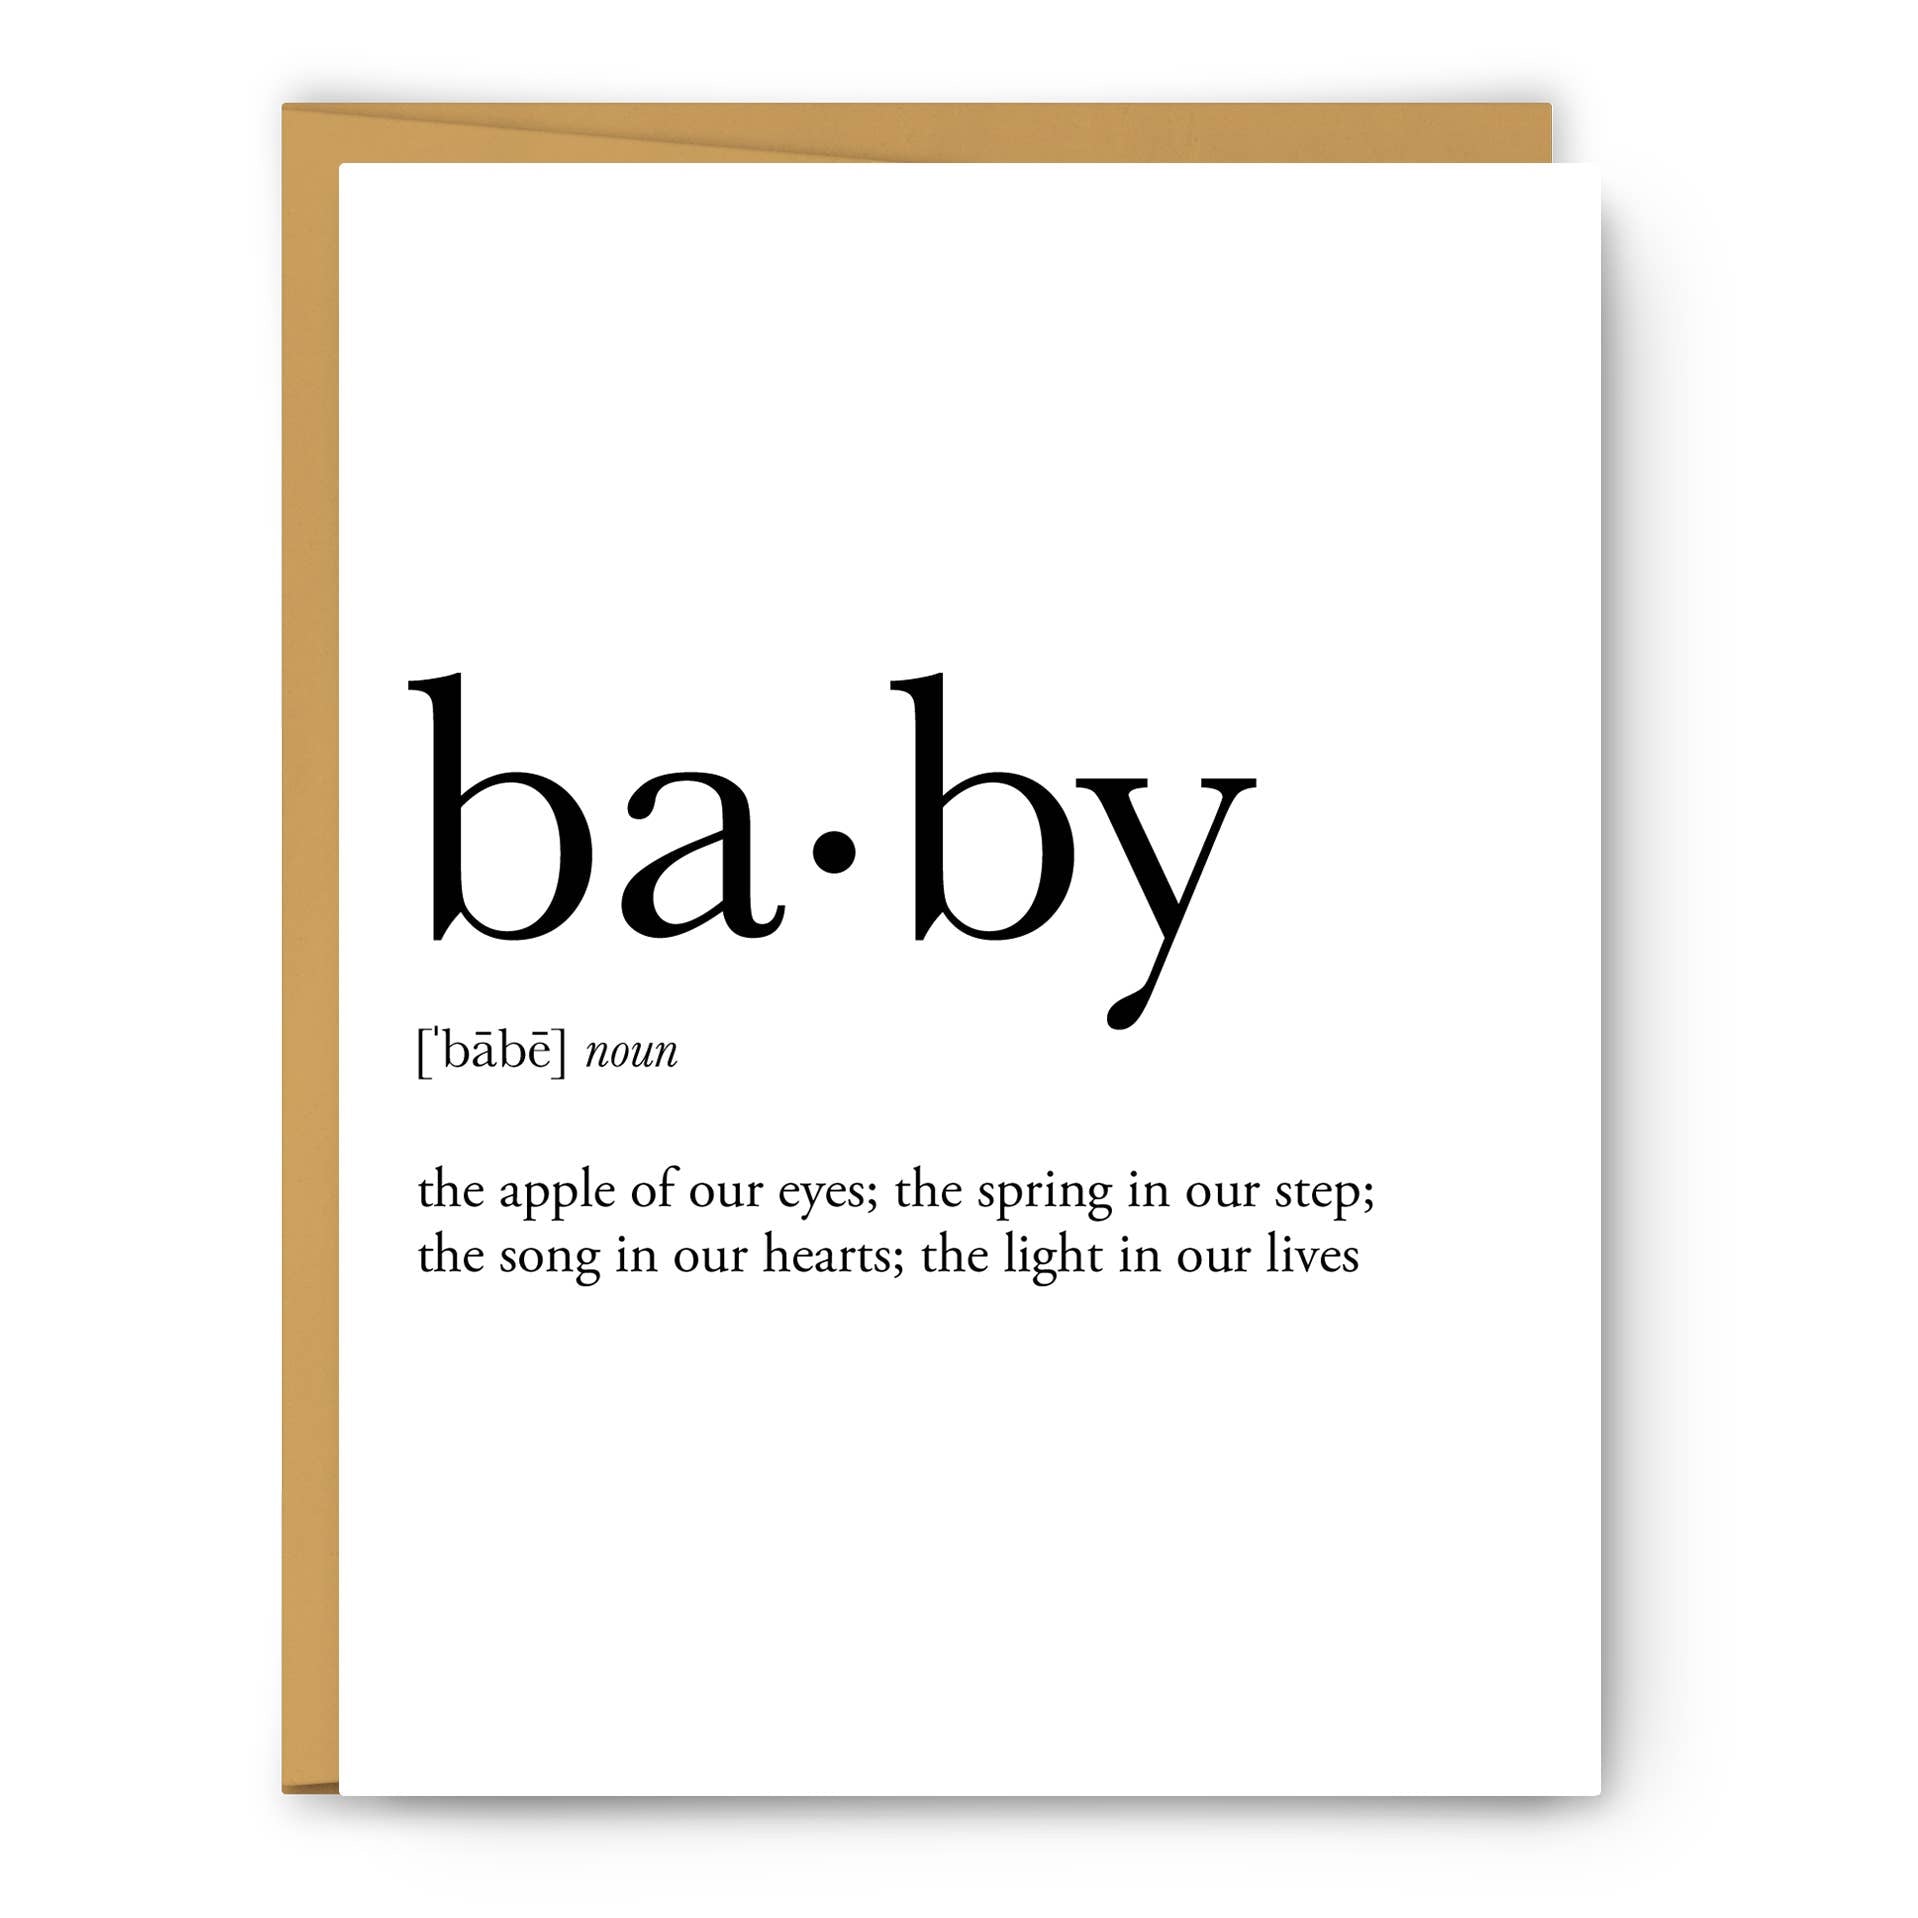 Baby Definition - Greeting Card - PaperGeenius